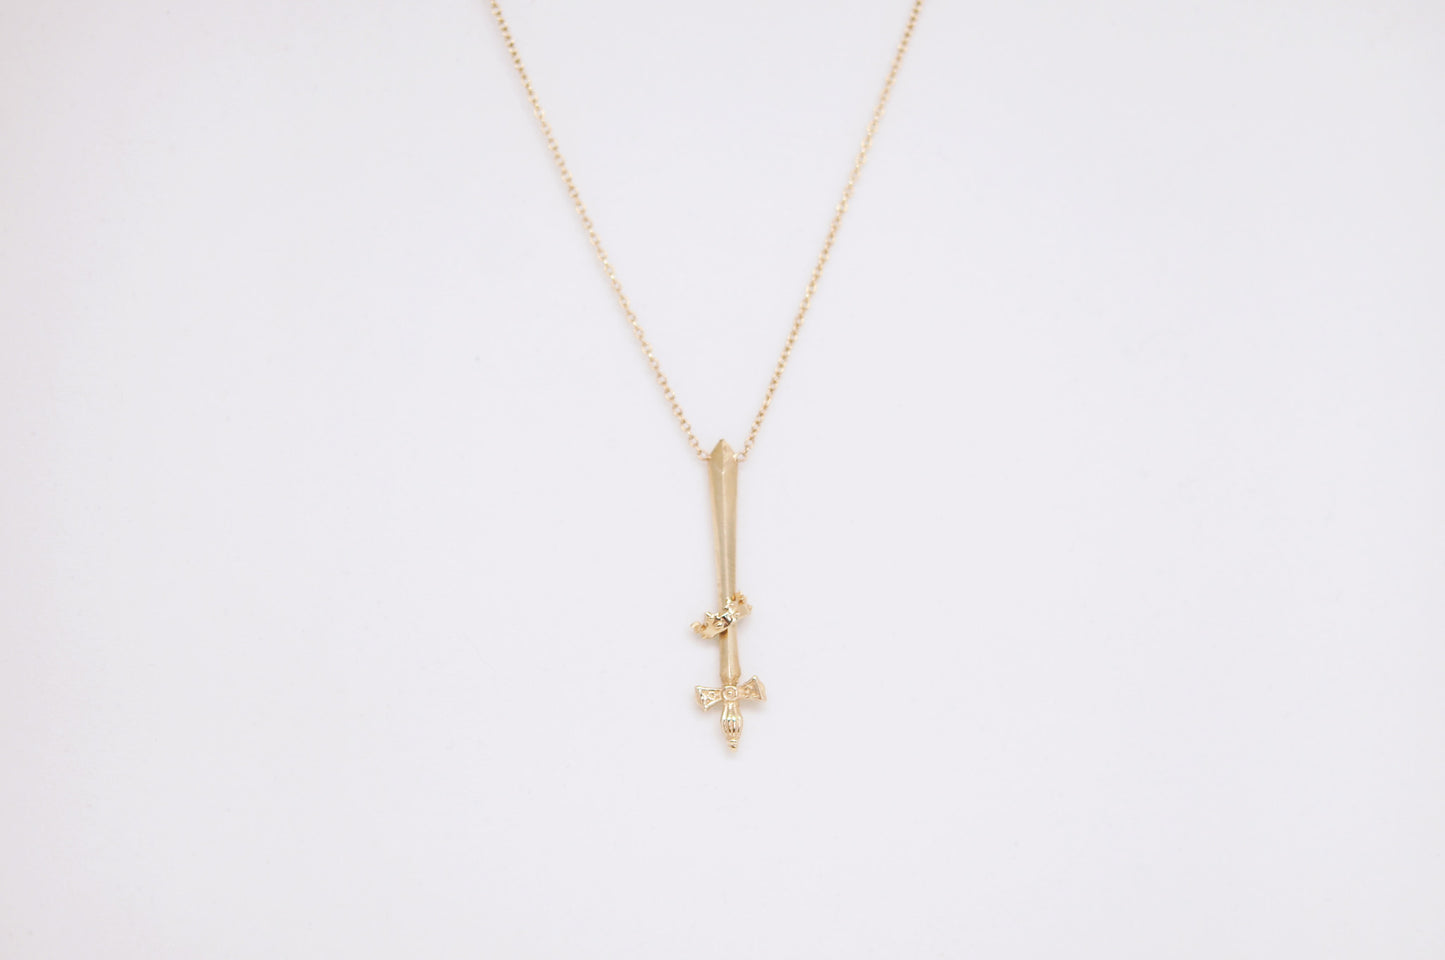 Ace of Swords Necklace